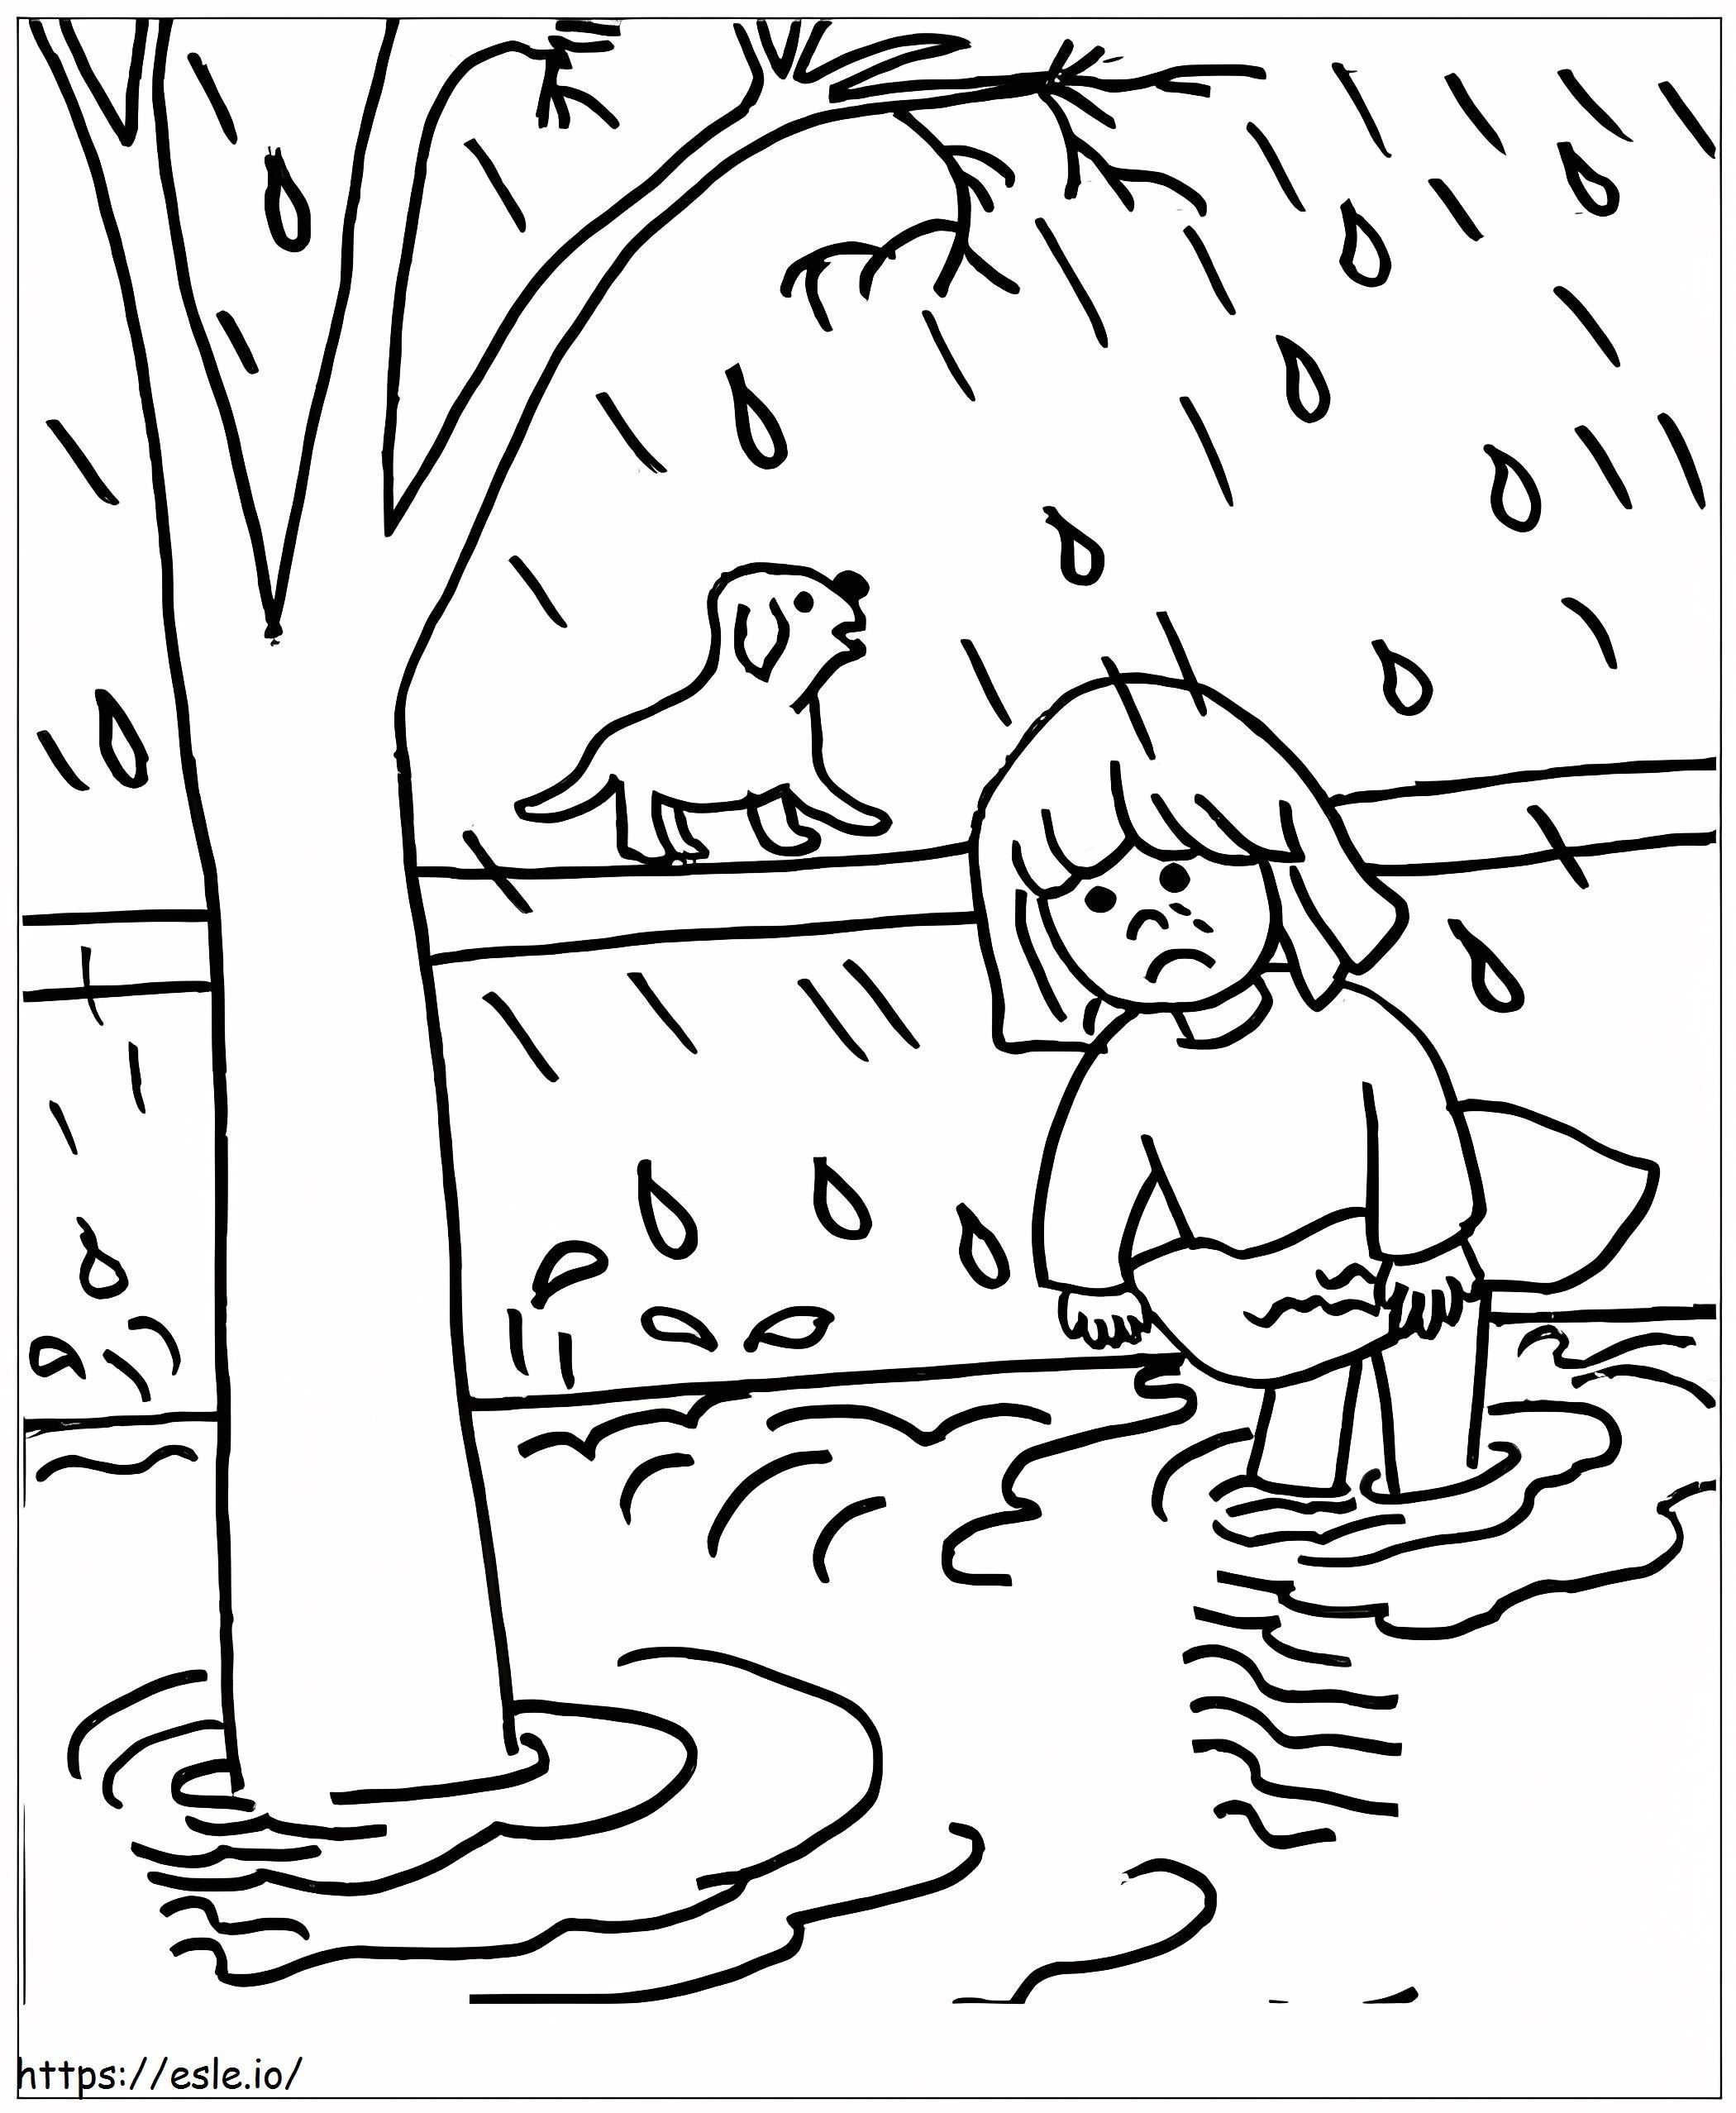 After Natural Disasters coloring page